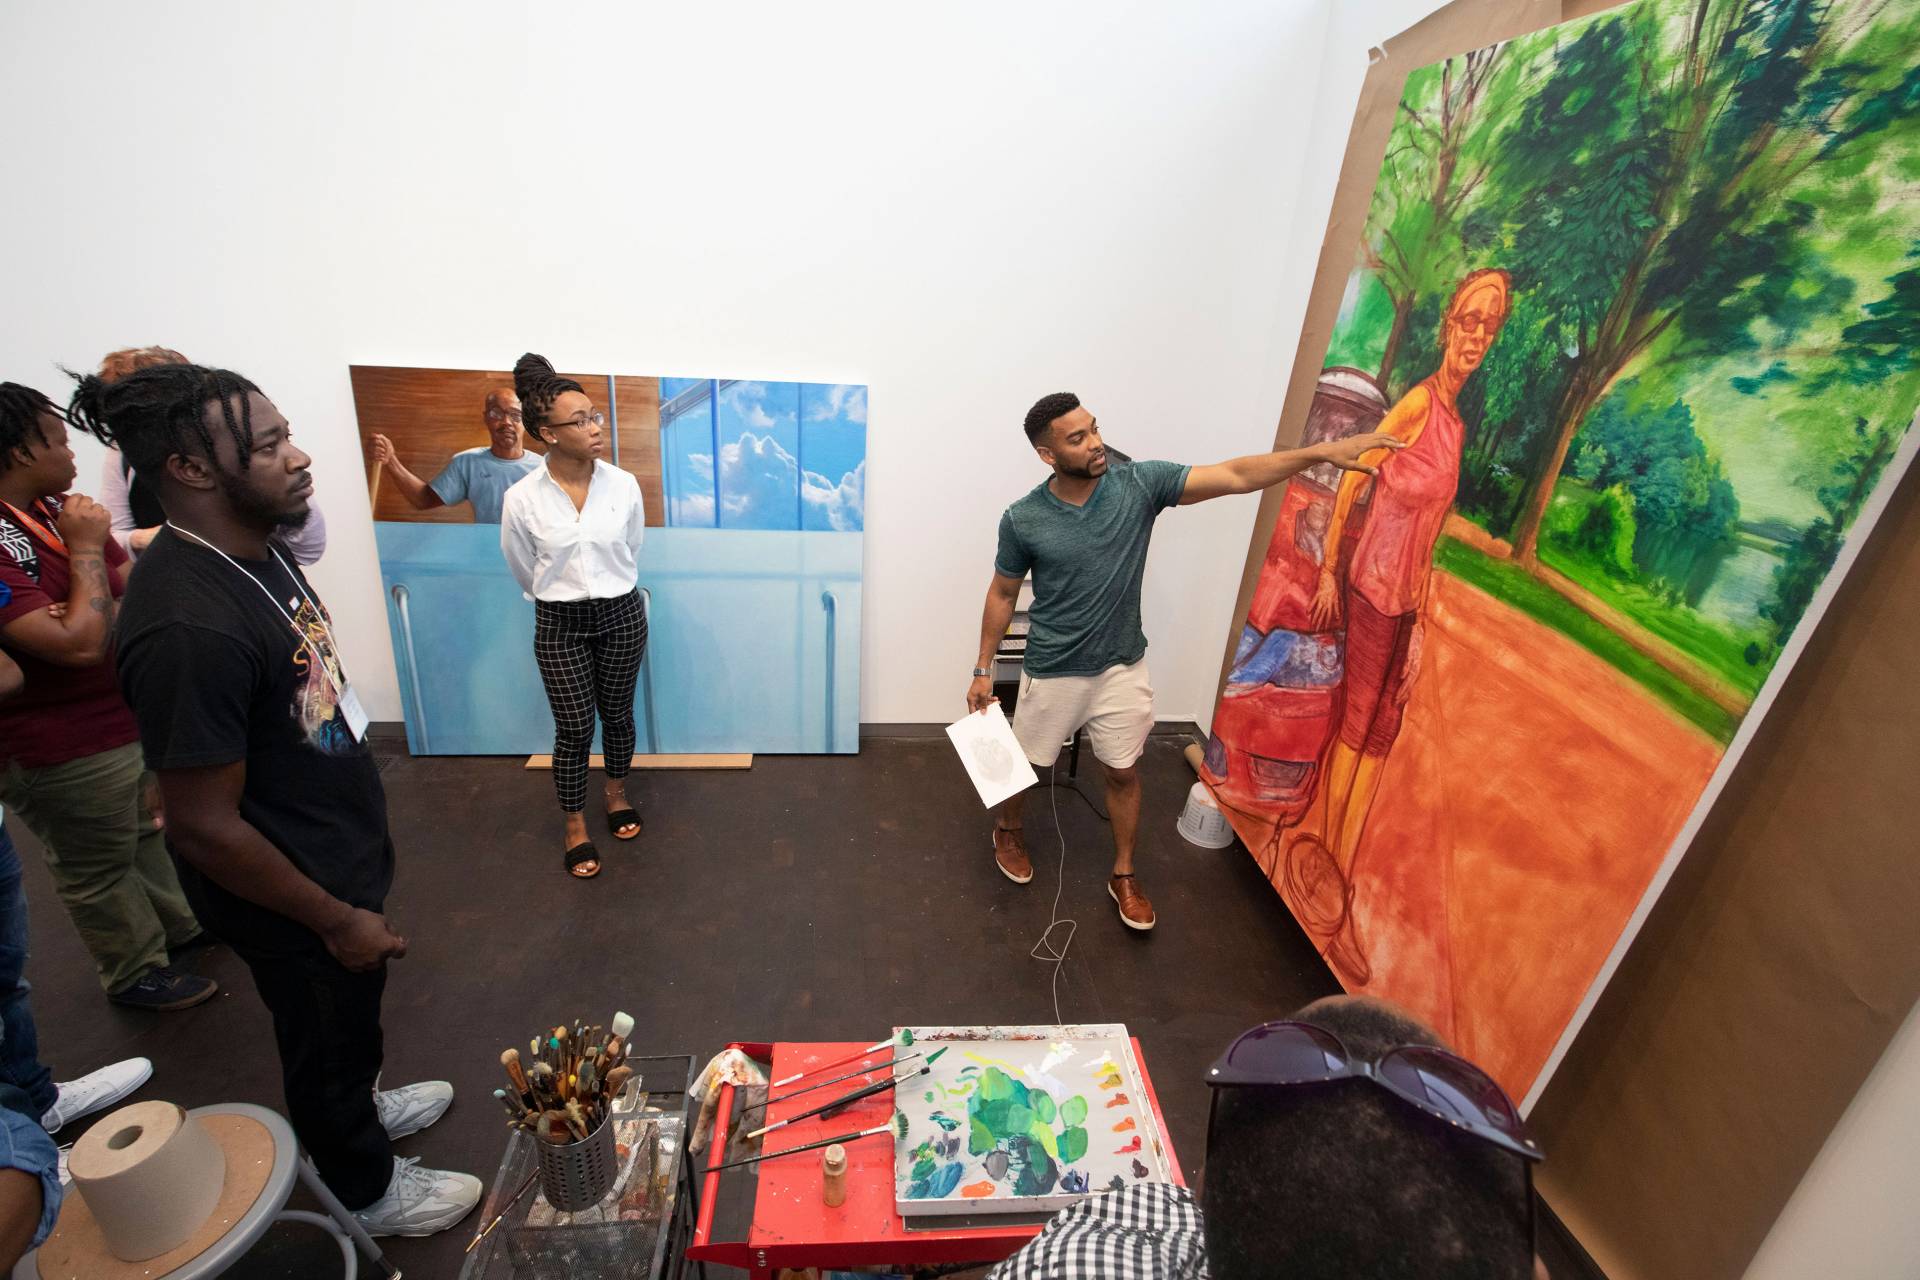 Painter Mario Moore points at a large unfinished painting on a tour of his studio